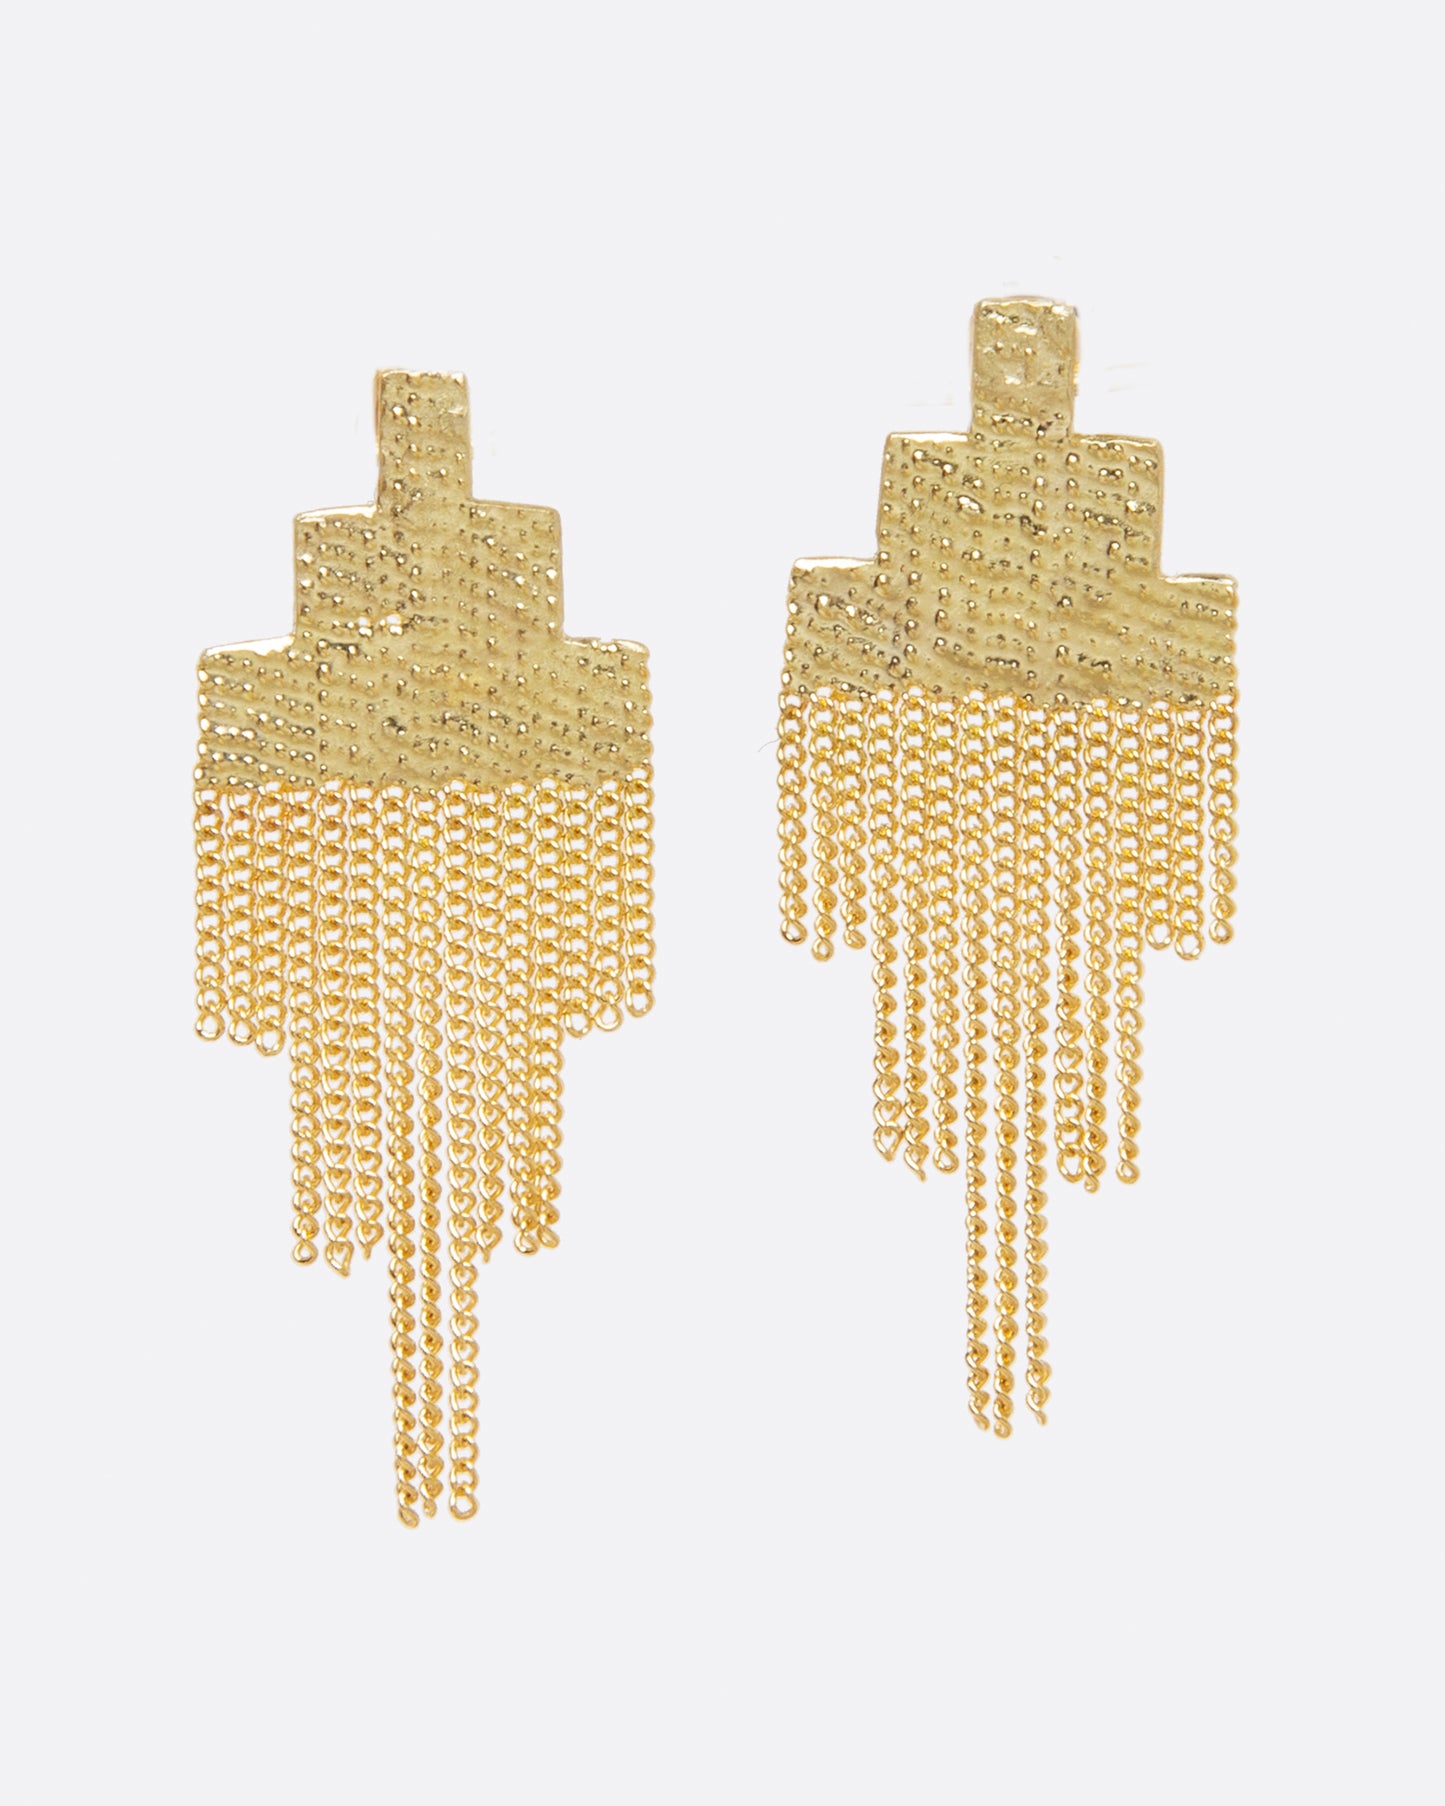 A pair of earrings made of chains in the shape of pixels. The top half has been soldered together to make it solid, but the bottom half is left to move with the wearer. 